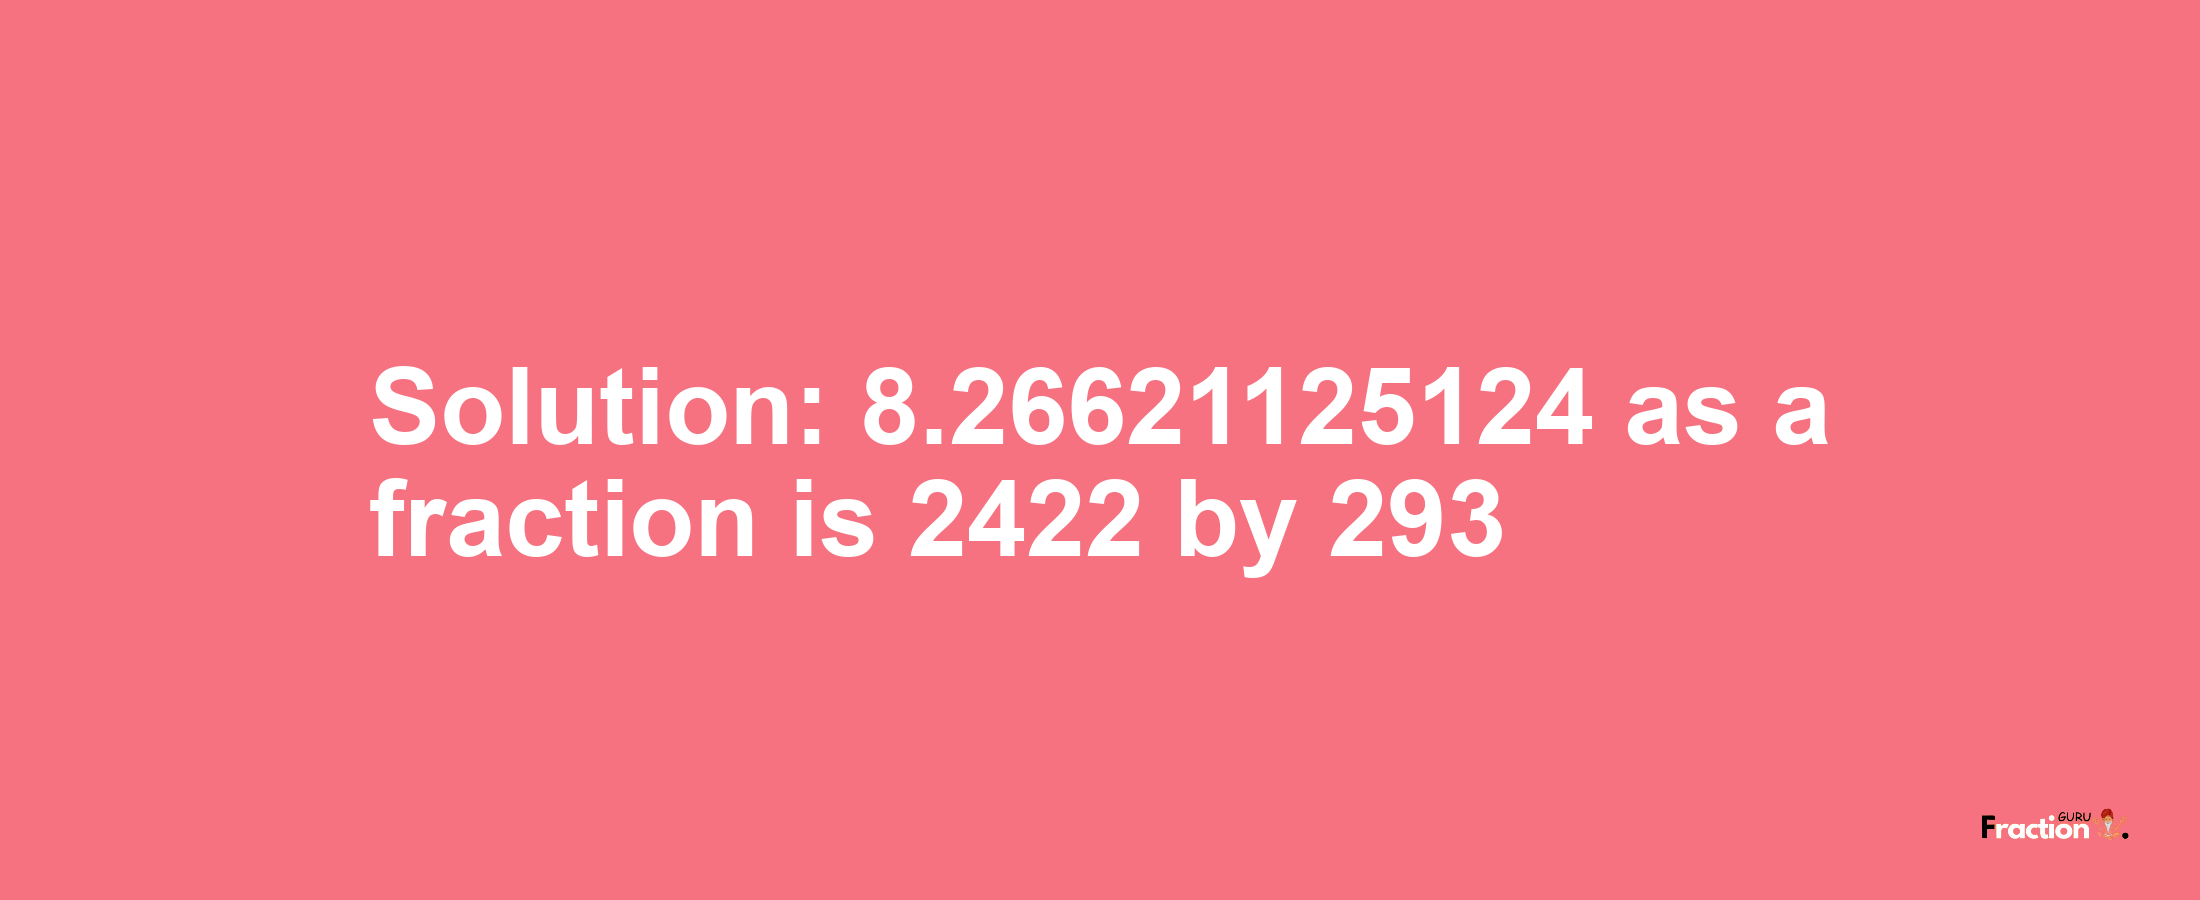 Solution:8.26621125124 as a fraction is 2422/293